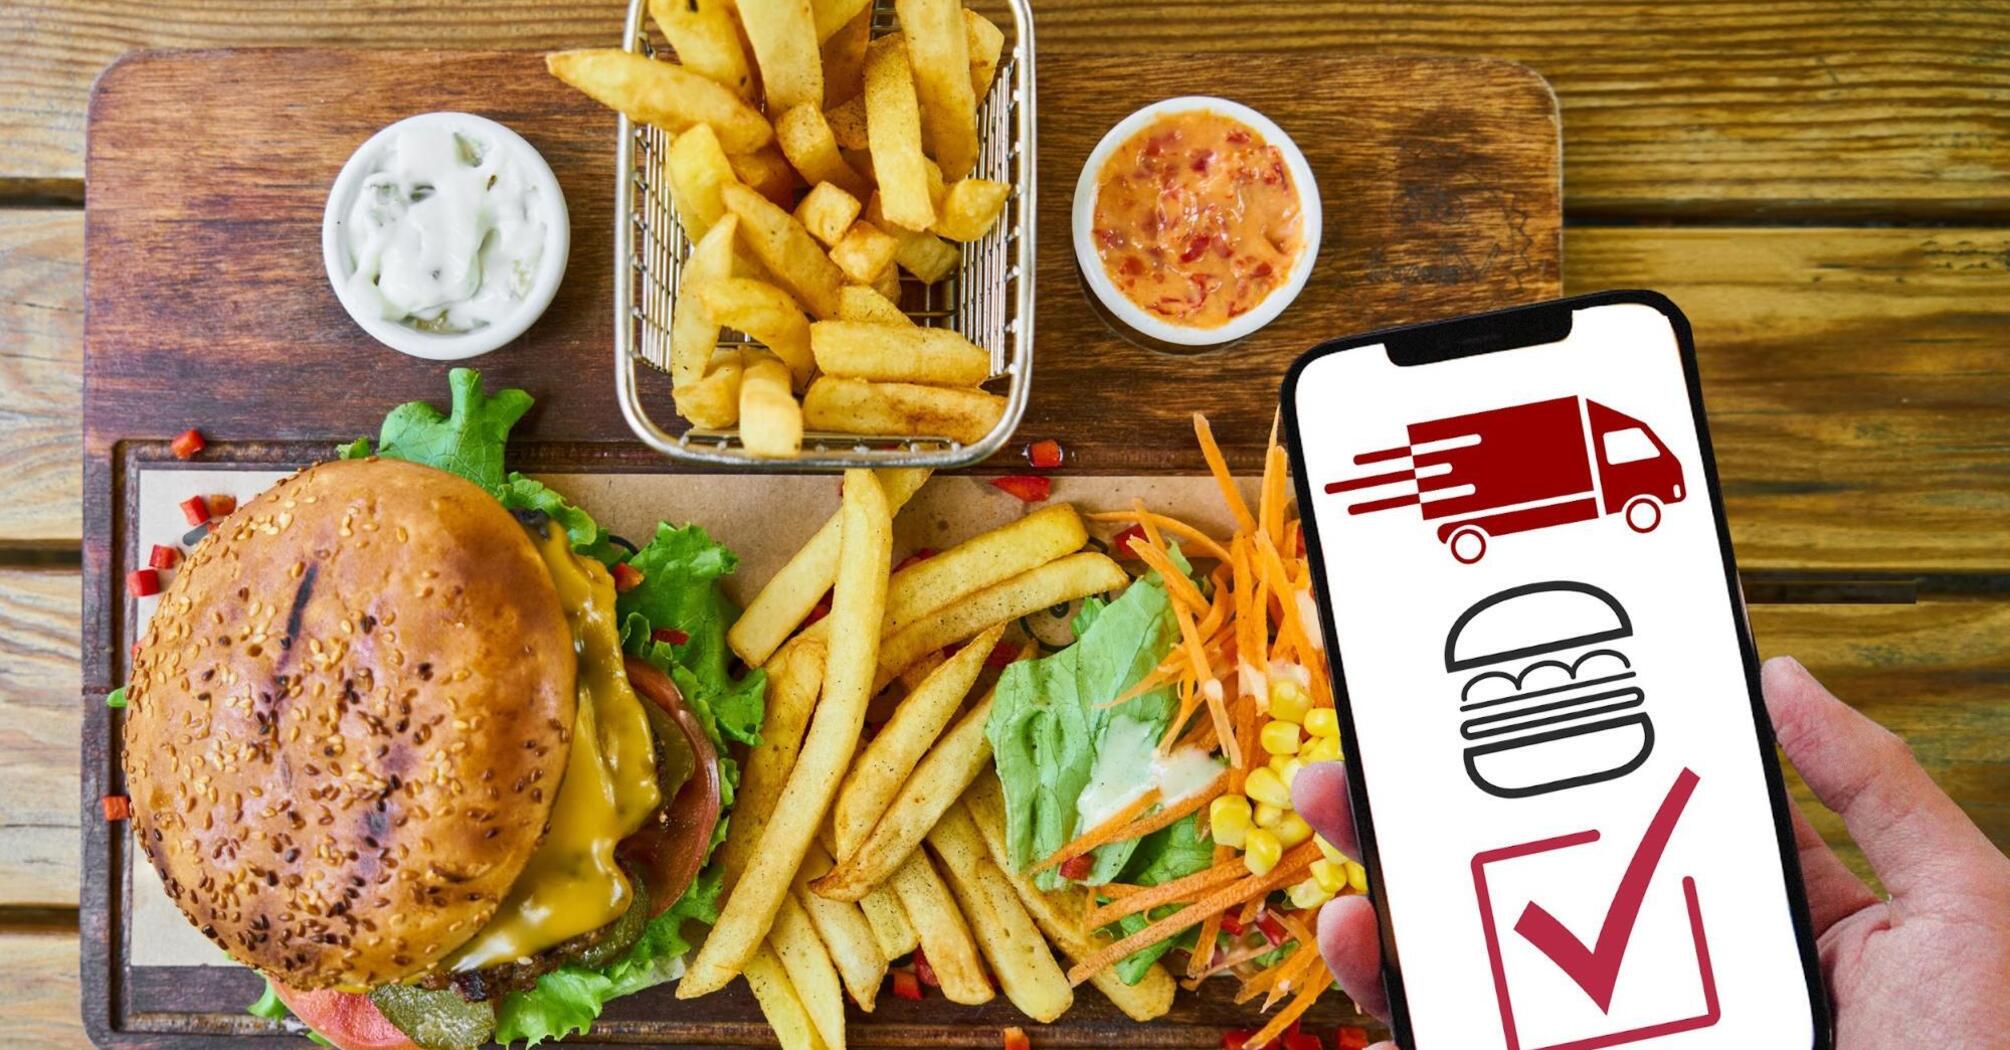 Burger and fries with a delivery call